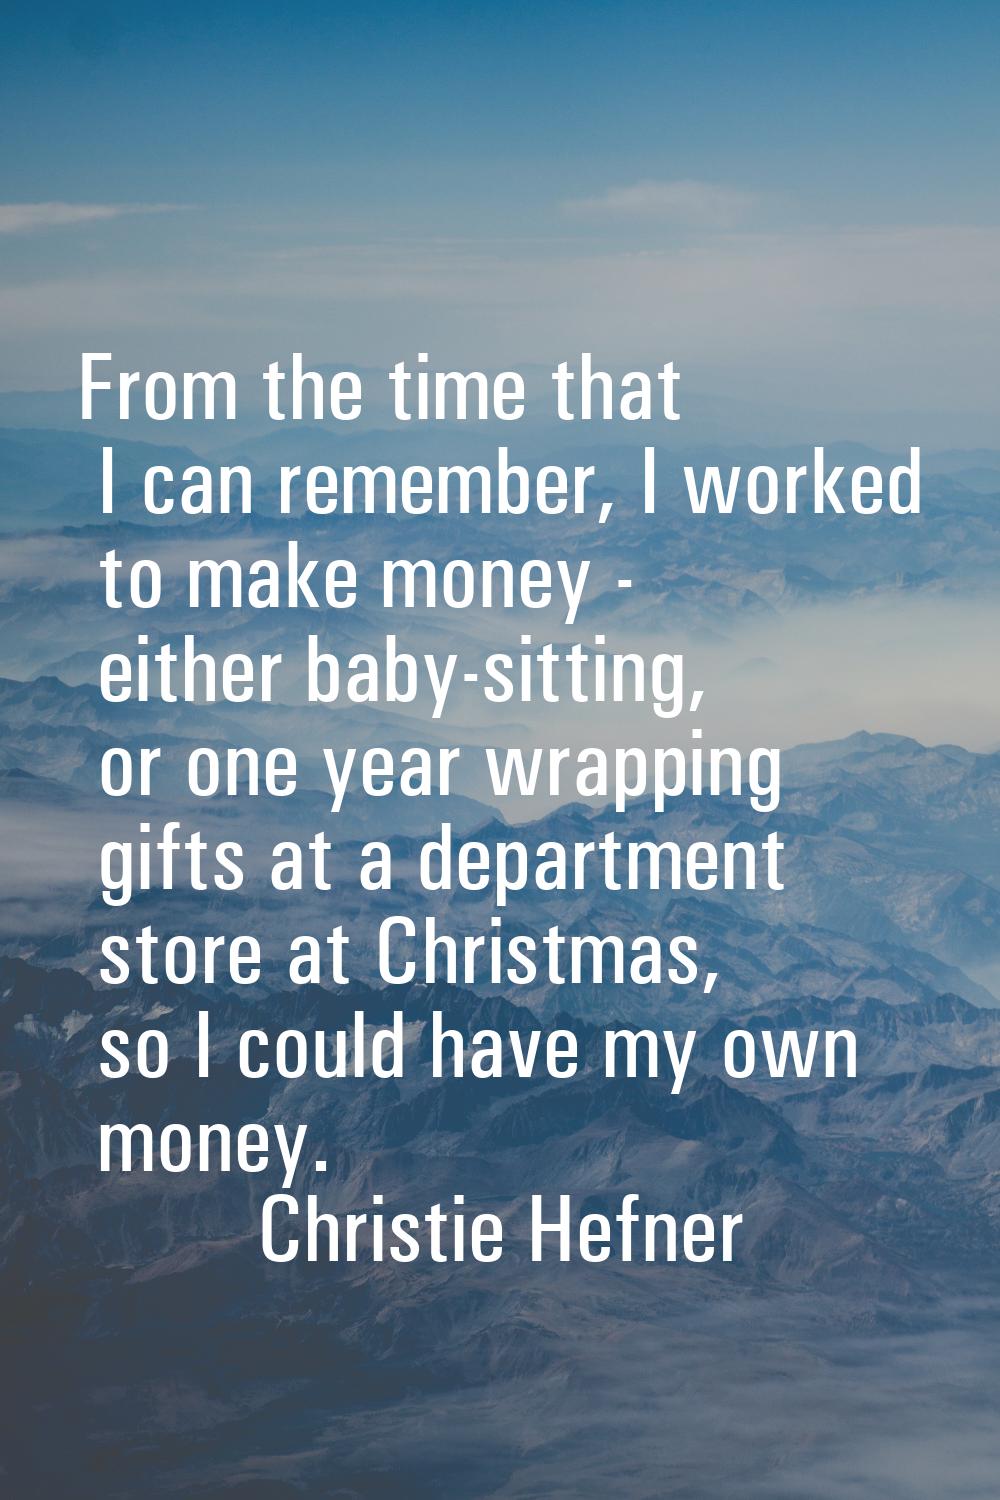 From the time that I can remember, I worked to make money - either baby-sitting, or one year wrappi